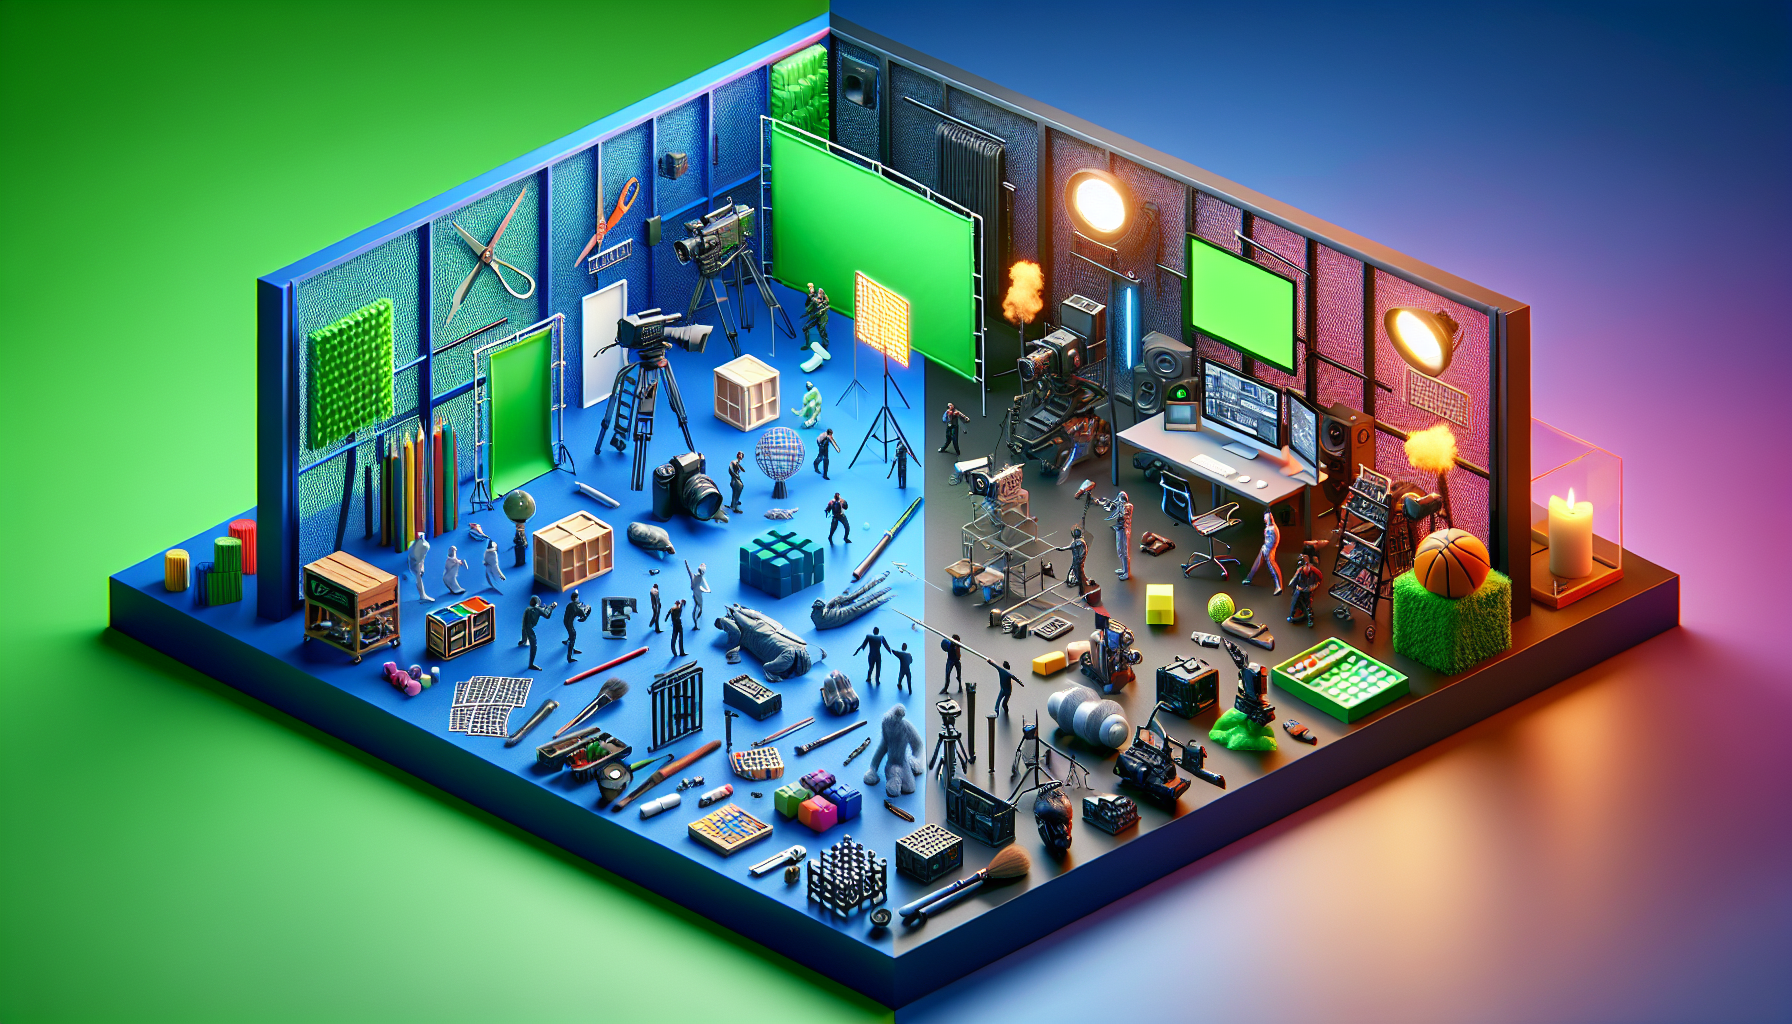 A photorealistic, overall modern image that represents the concept of choosing between practical effects and CGI for action scenes. On the left side of the image, show the practical effects section with props like miniatures, scaled sets, physical makeup and prosthetics. On the right side, visualize the CGI aspect with representation of green screens, 3D models, and computer workstations. Both sides should be vivid and colorful, symbolizing the rich variety of techniques used in modern filmmaking.